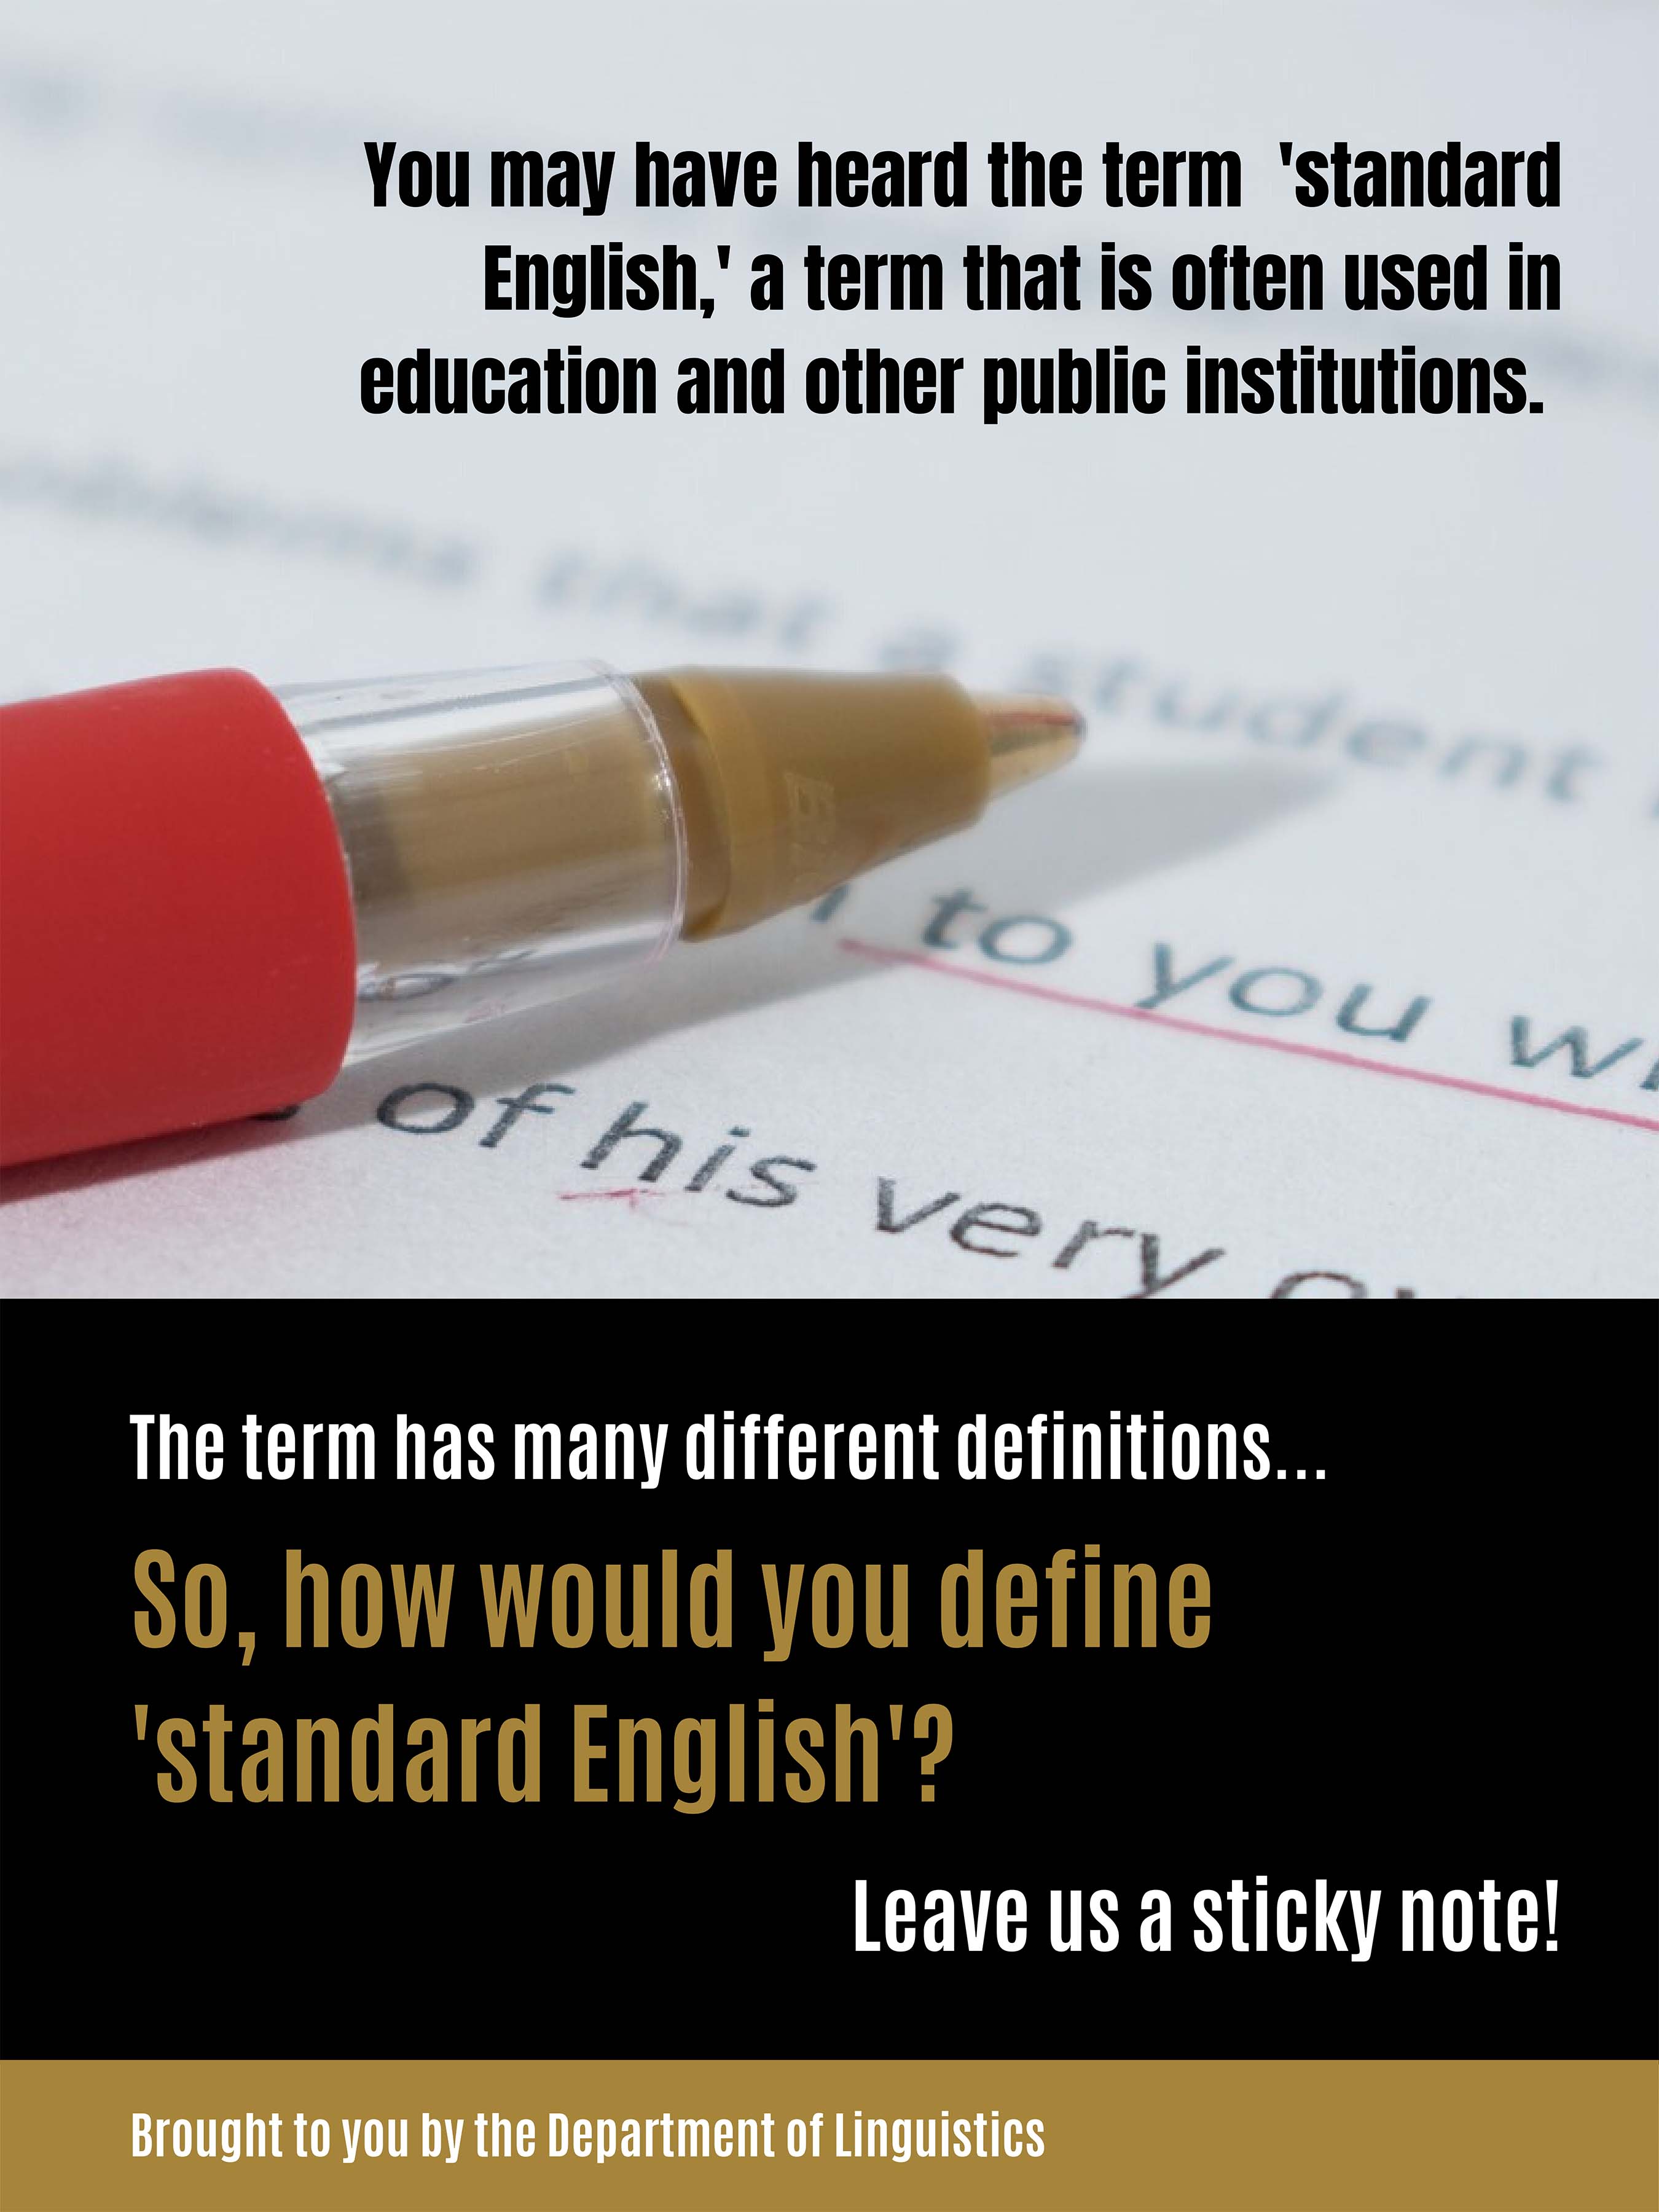 How would you define 'standard English'? Click on image to see full description.